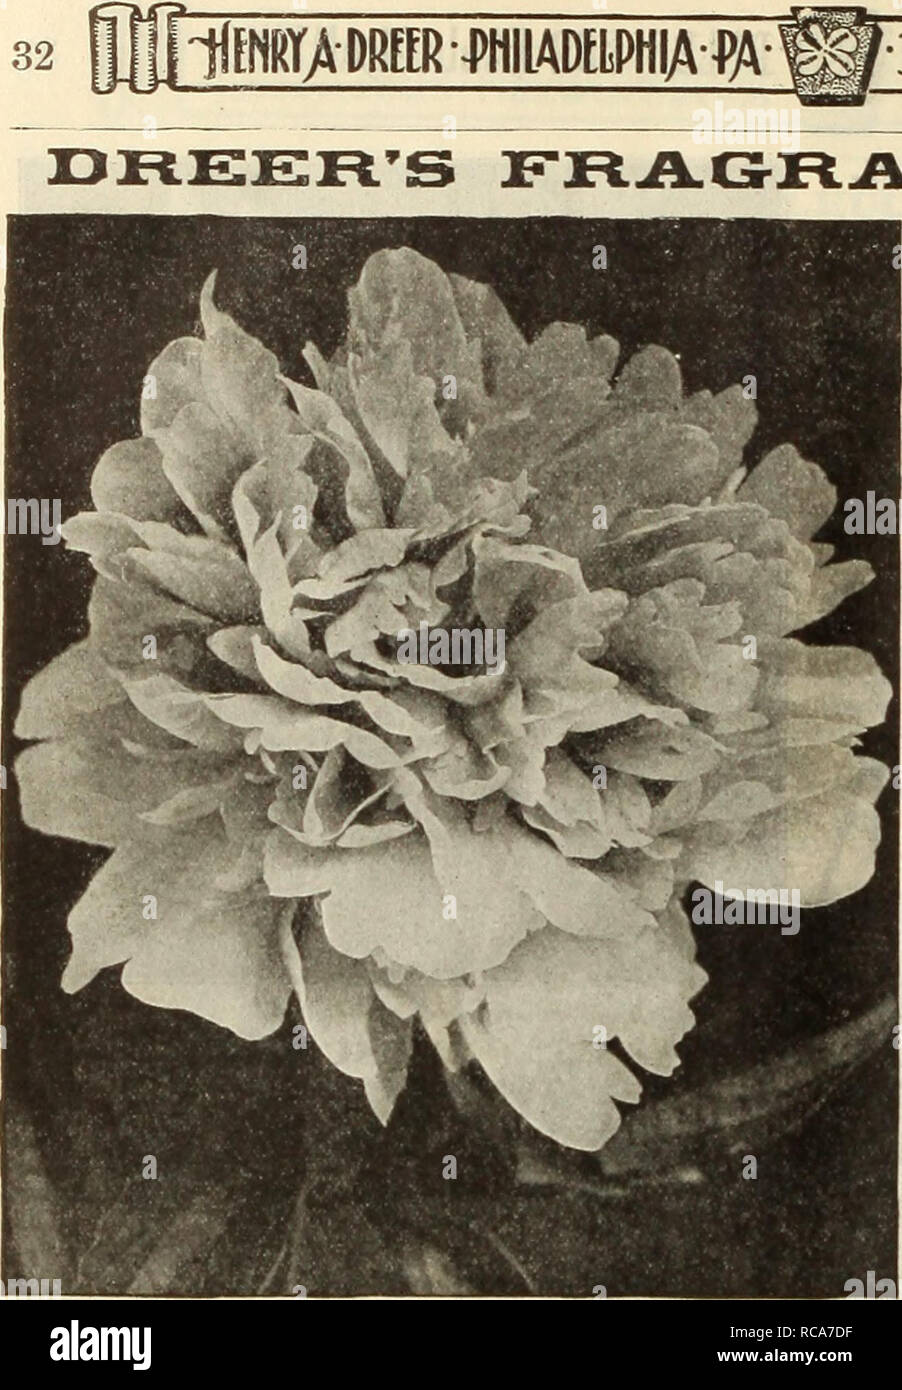 . Dreer's autumn catalogue 1912. Bulbs (Plants) Catalogs; Flowers Seeds Catalogs; Gardening Equipment and supplies Catalogs; Nurseries (Horticulture) Catalogs; Fruit Seeds Catalogs; Vegetables Seeds Catalogs. an DouiiLE Hhrbacbous P^eony. Felix Crousse. Large, ball-shaped bloom; very brilliant red; one of the finest self-colored varieties. 7o cts. each; $7.50 per doz. Very large, showy, pale lilac-rose; extra Floral Treasure choice variety. Golden Harvest white centre. General Bertrand. Large centre petals tinted salmon. Medium size; peach-blossom pink; creamy- compact, medium dark pink; ed sa Stock Photo